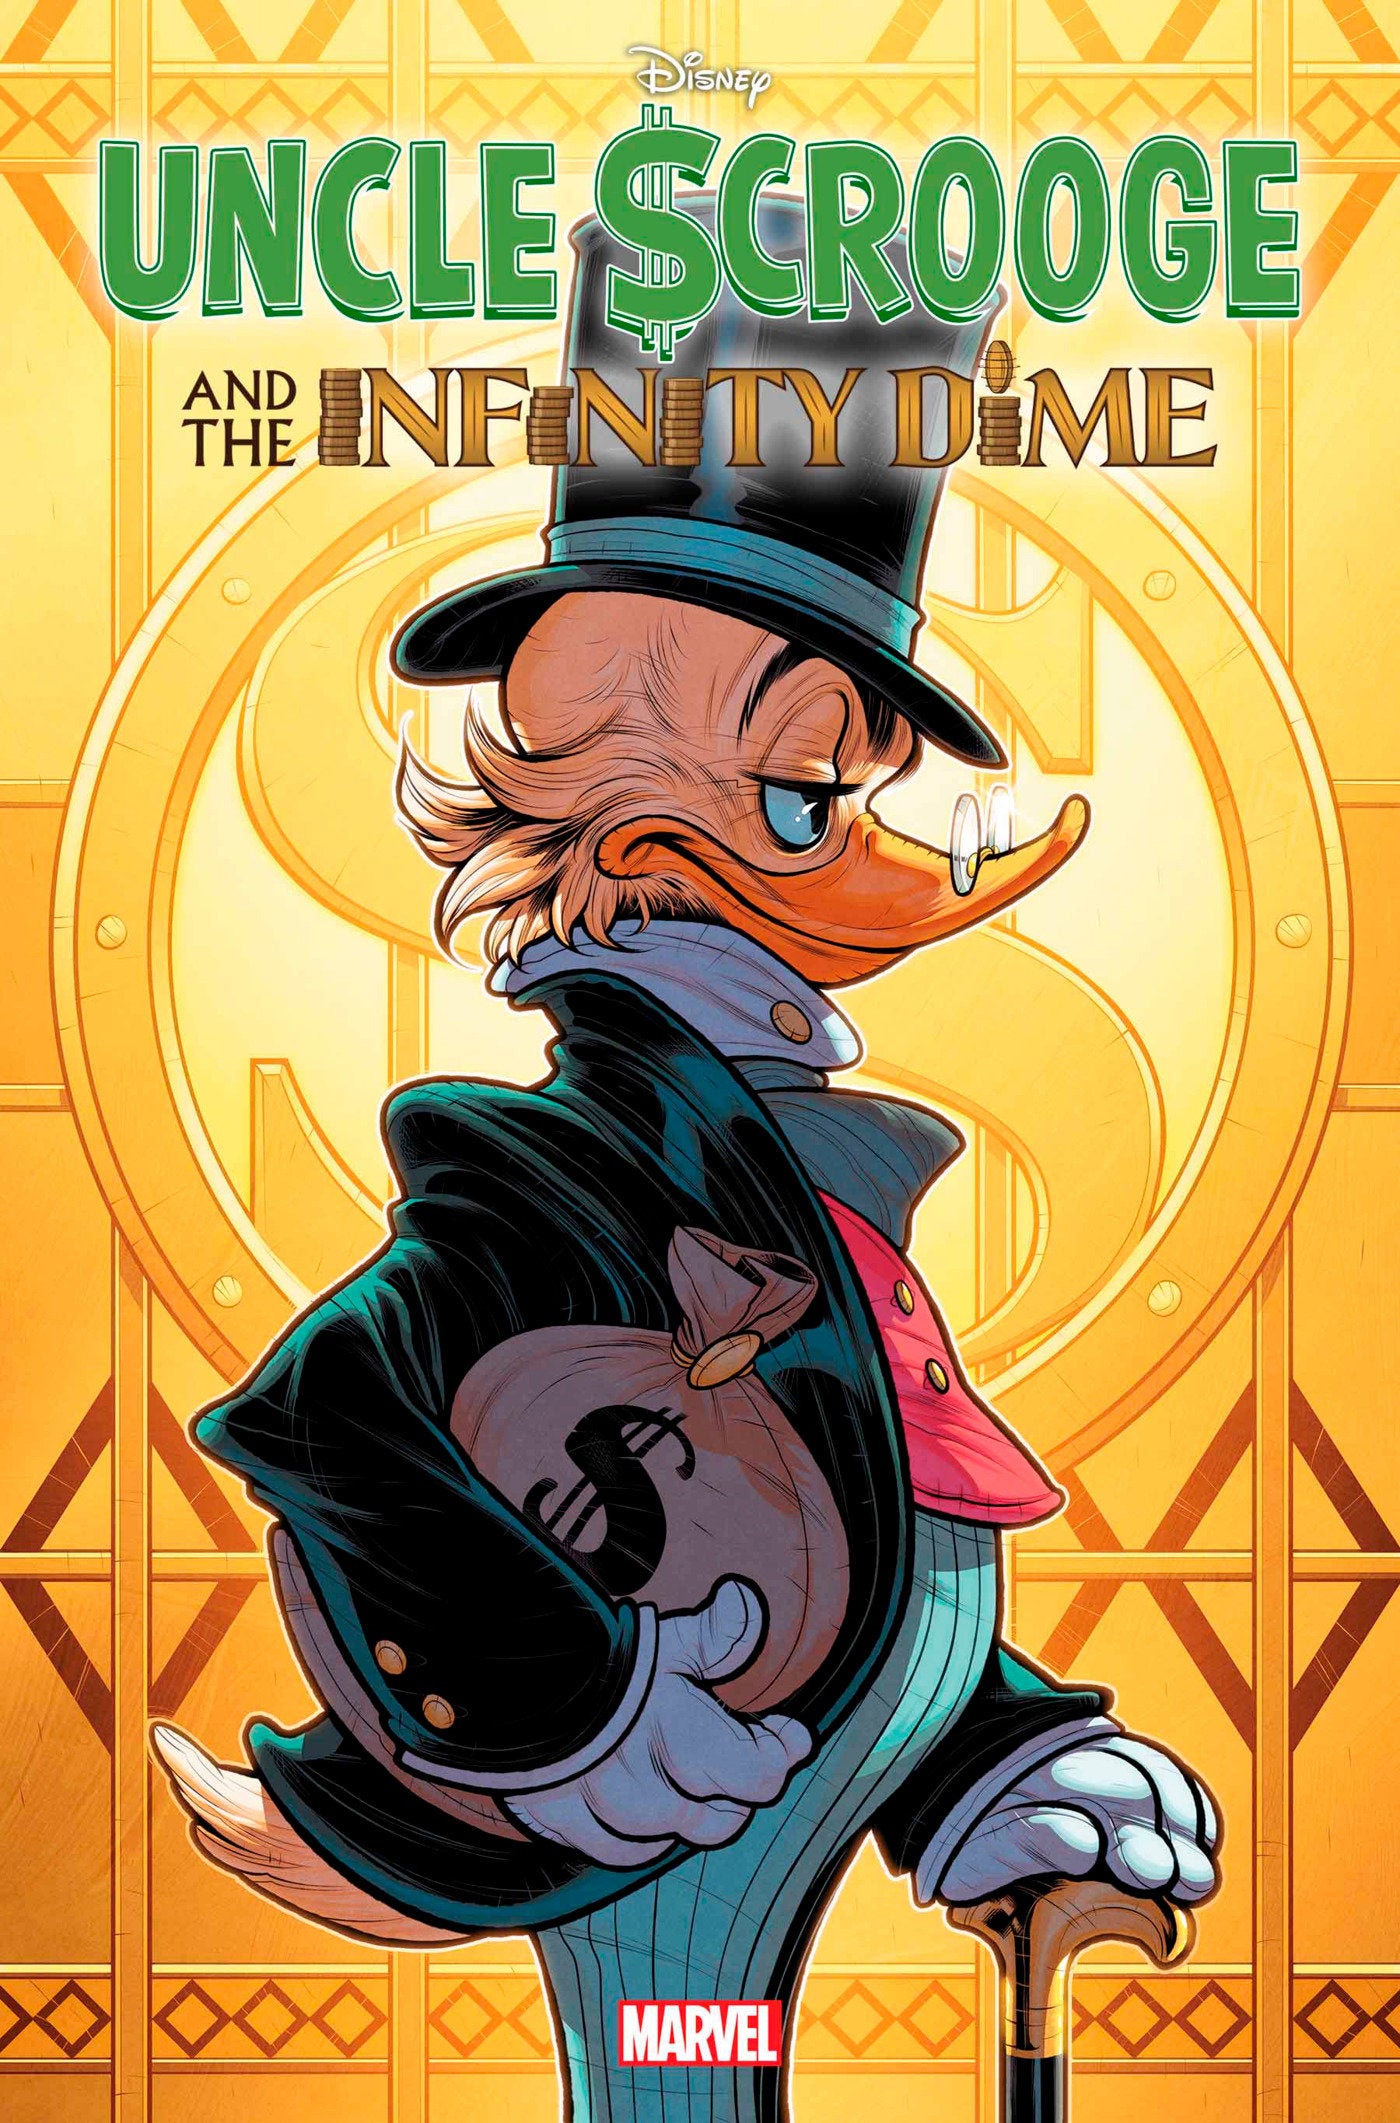 UNCLE SCROOGE AND THE INFINITY DIME #1 ELIZABETH TORQUE VARIANT